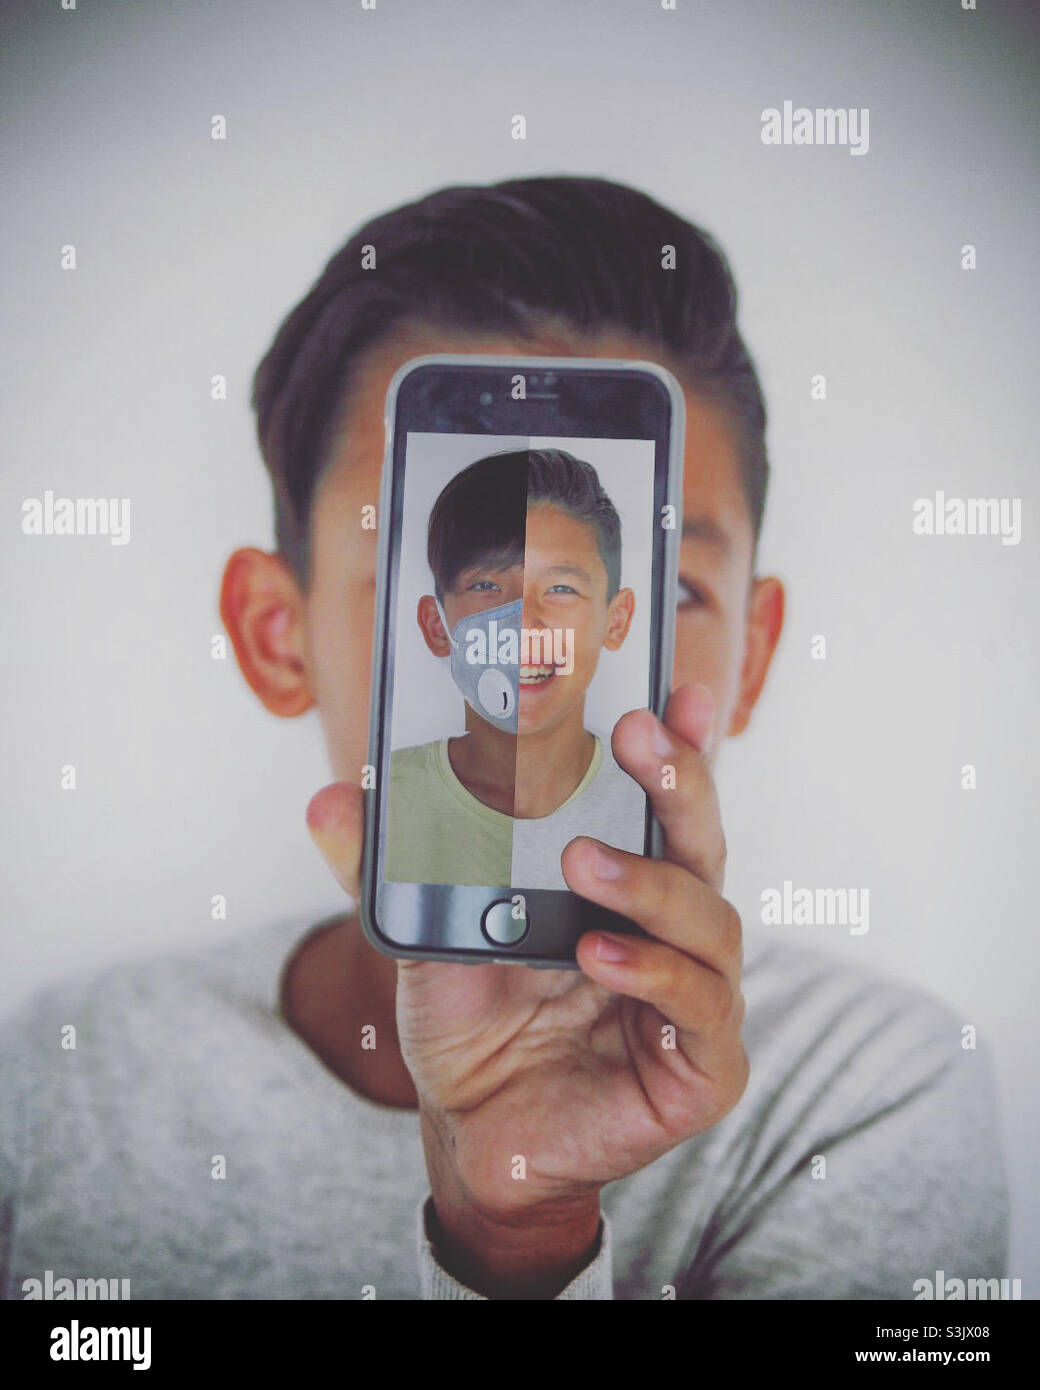 young boy showing his smartohone’s screen to camera with a portrait if himself Stock Photo